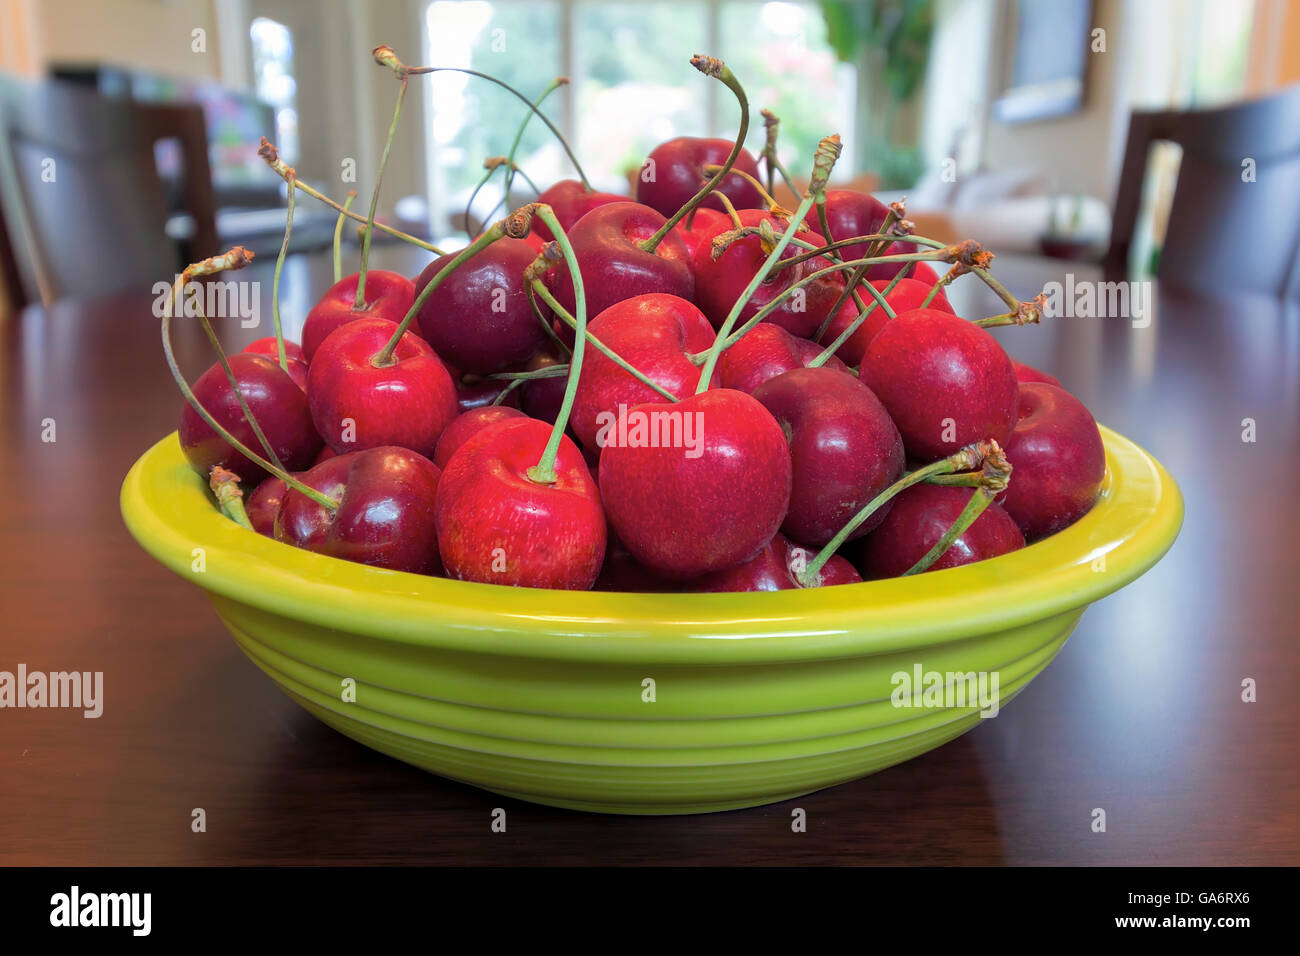 Pile of Bing Cherries in green bowl and on wood dining table Stock Photo